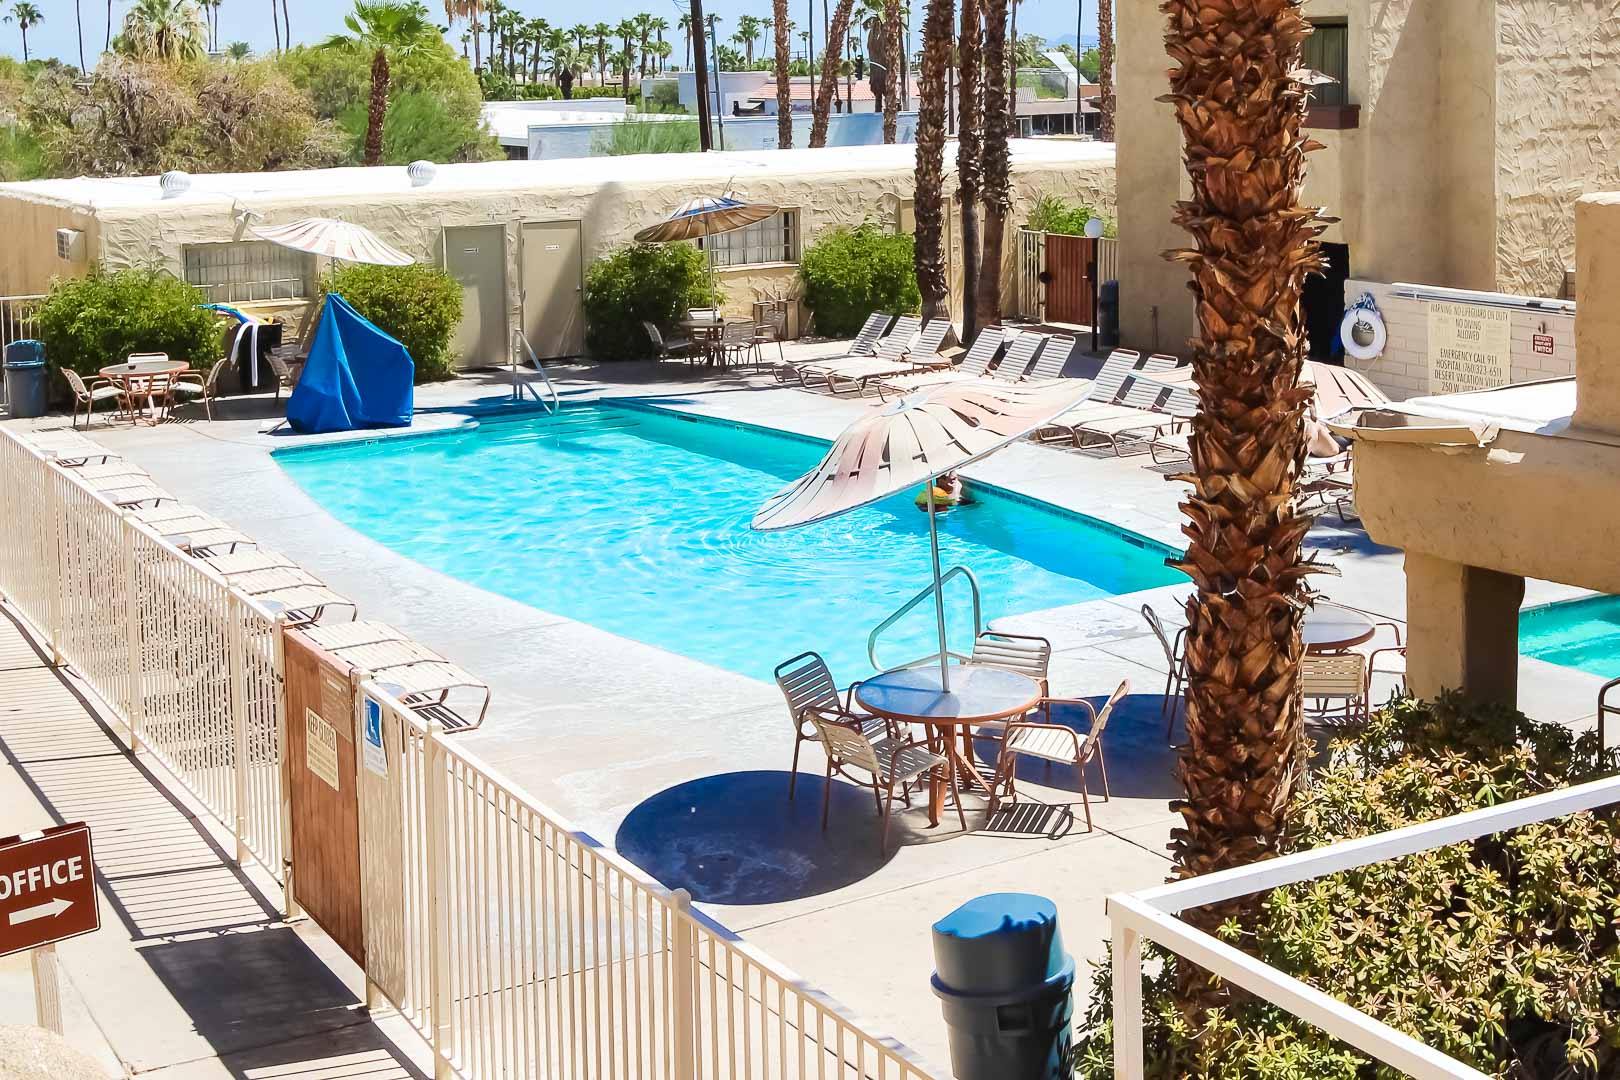 An outdoor swimming pool at VRI's Desert Vacation Villas in Palm Springs California.